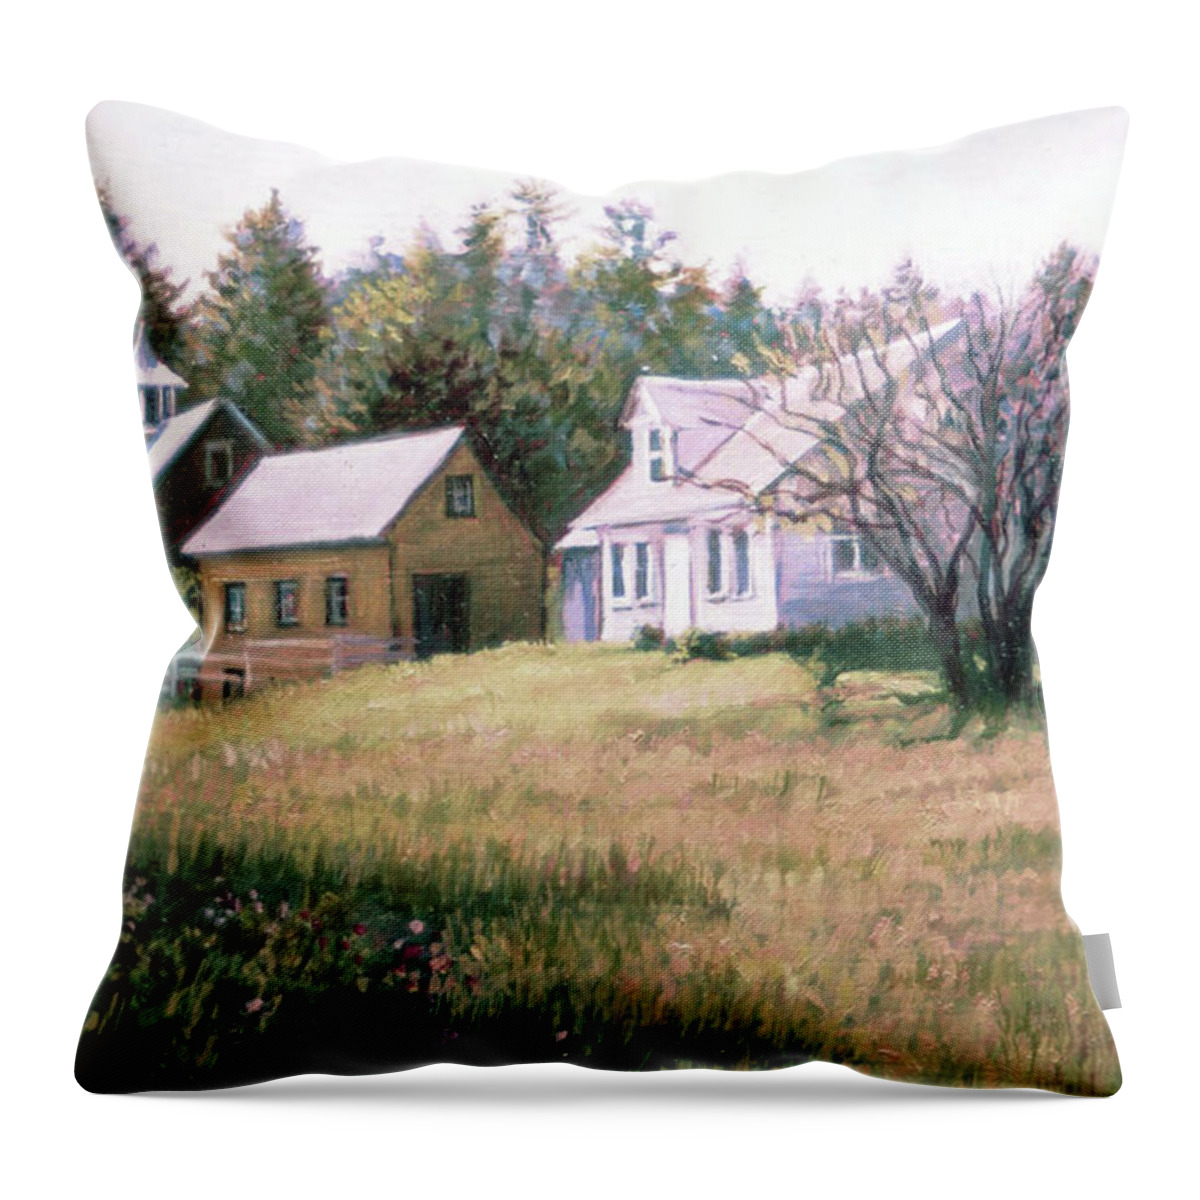 Farm Throw Pillow featuring the painting Early Morning Farm by Marie Witte